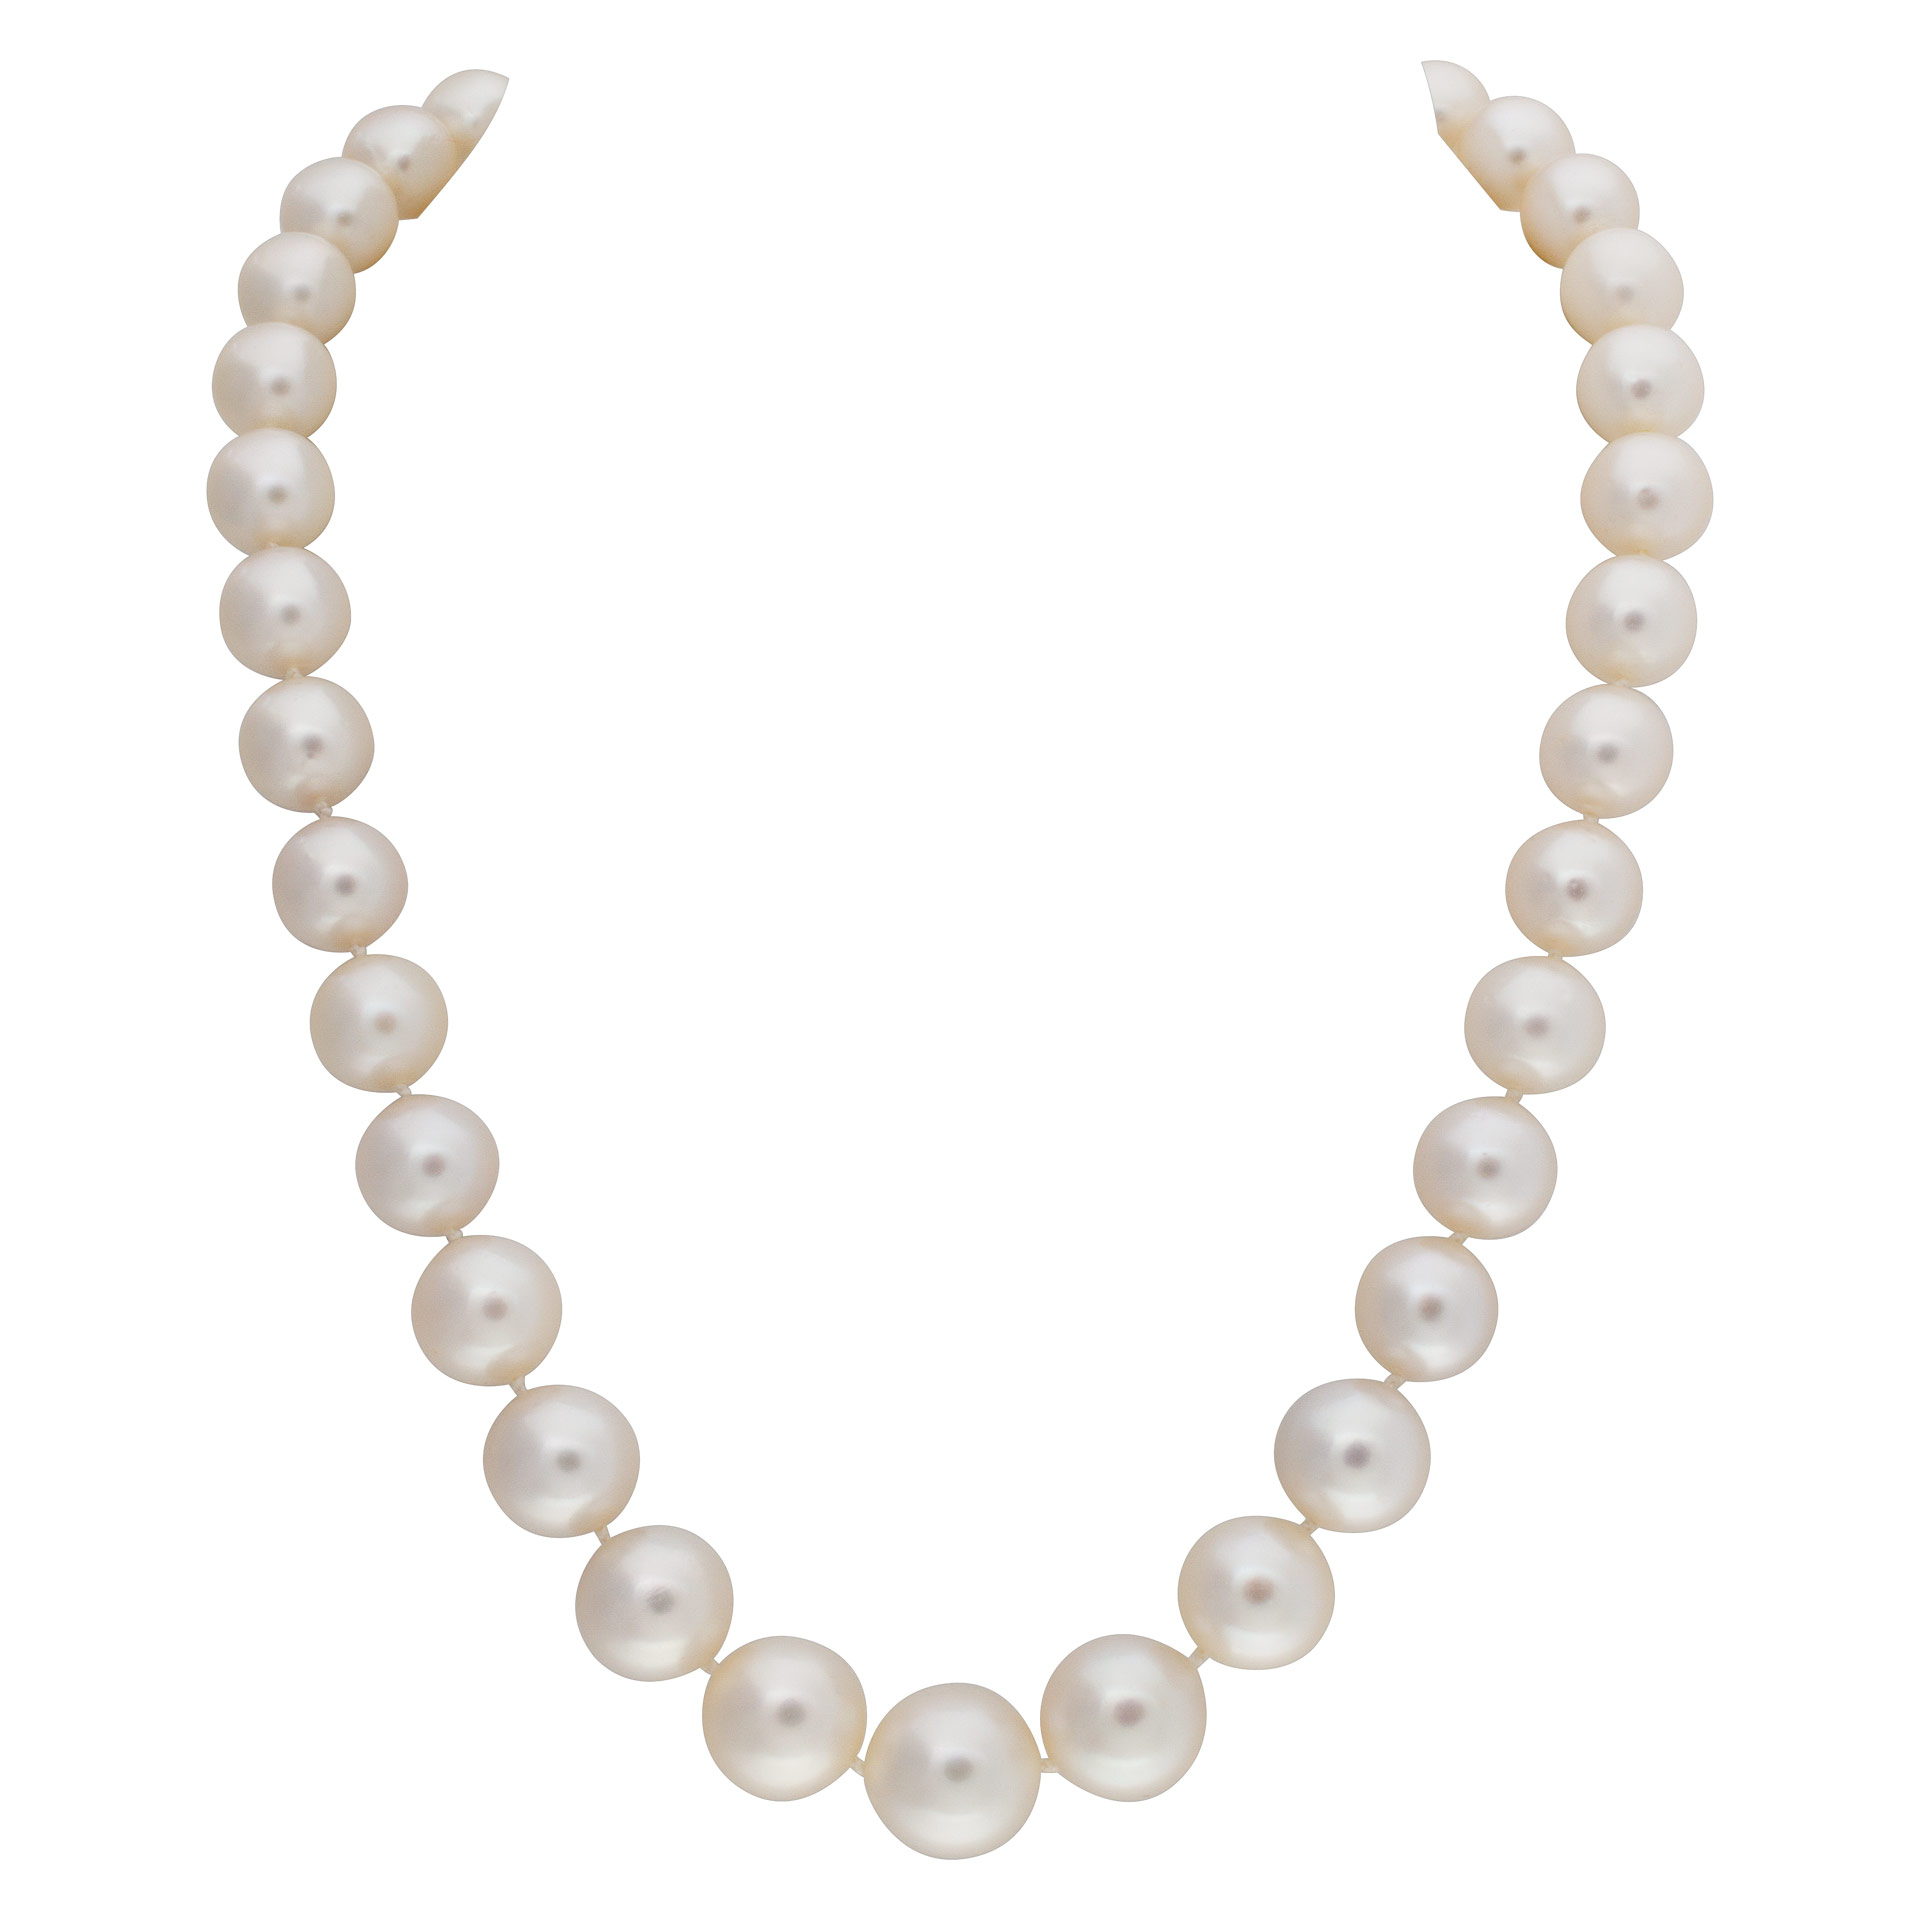 South Sea pearl necklace with 18K white gold diamond clasp. image 1